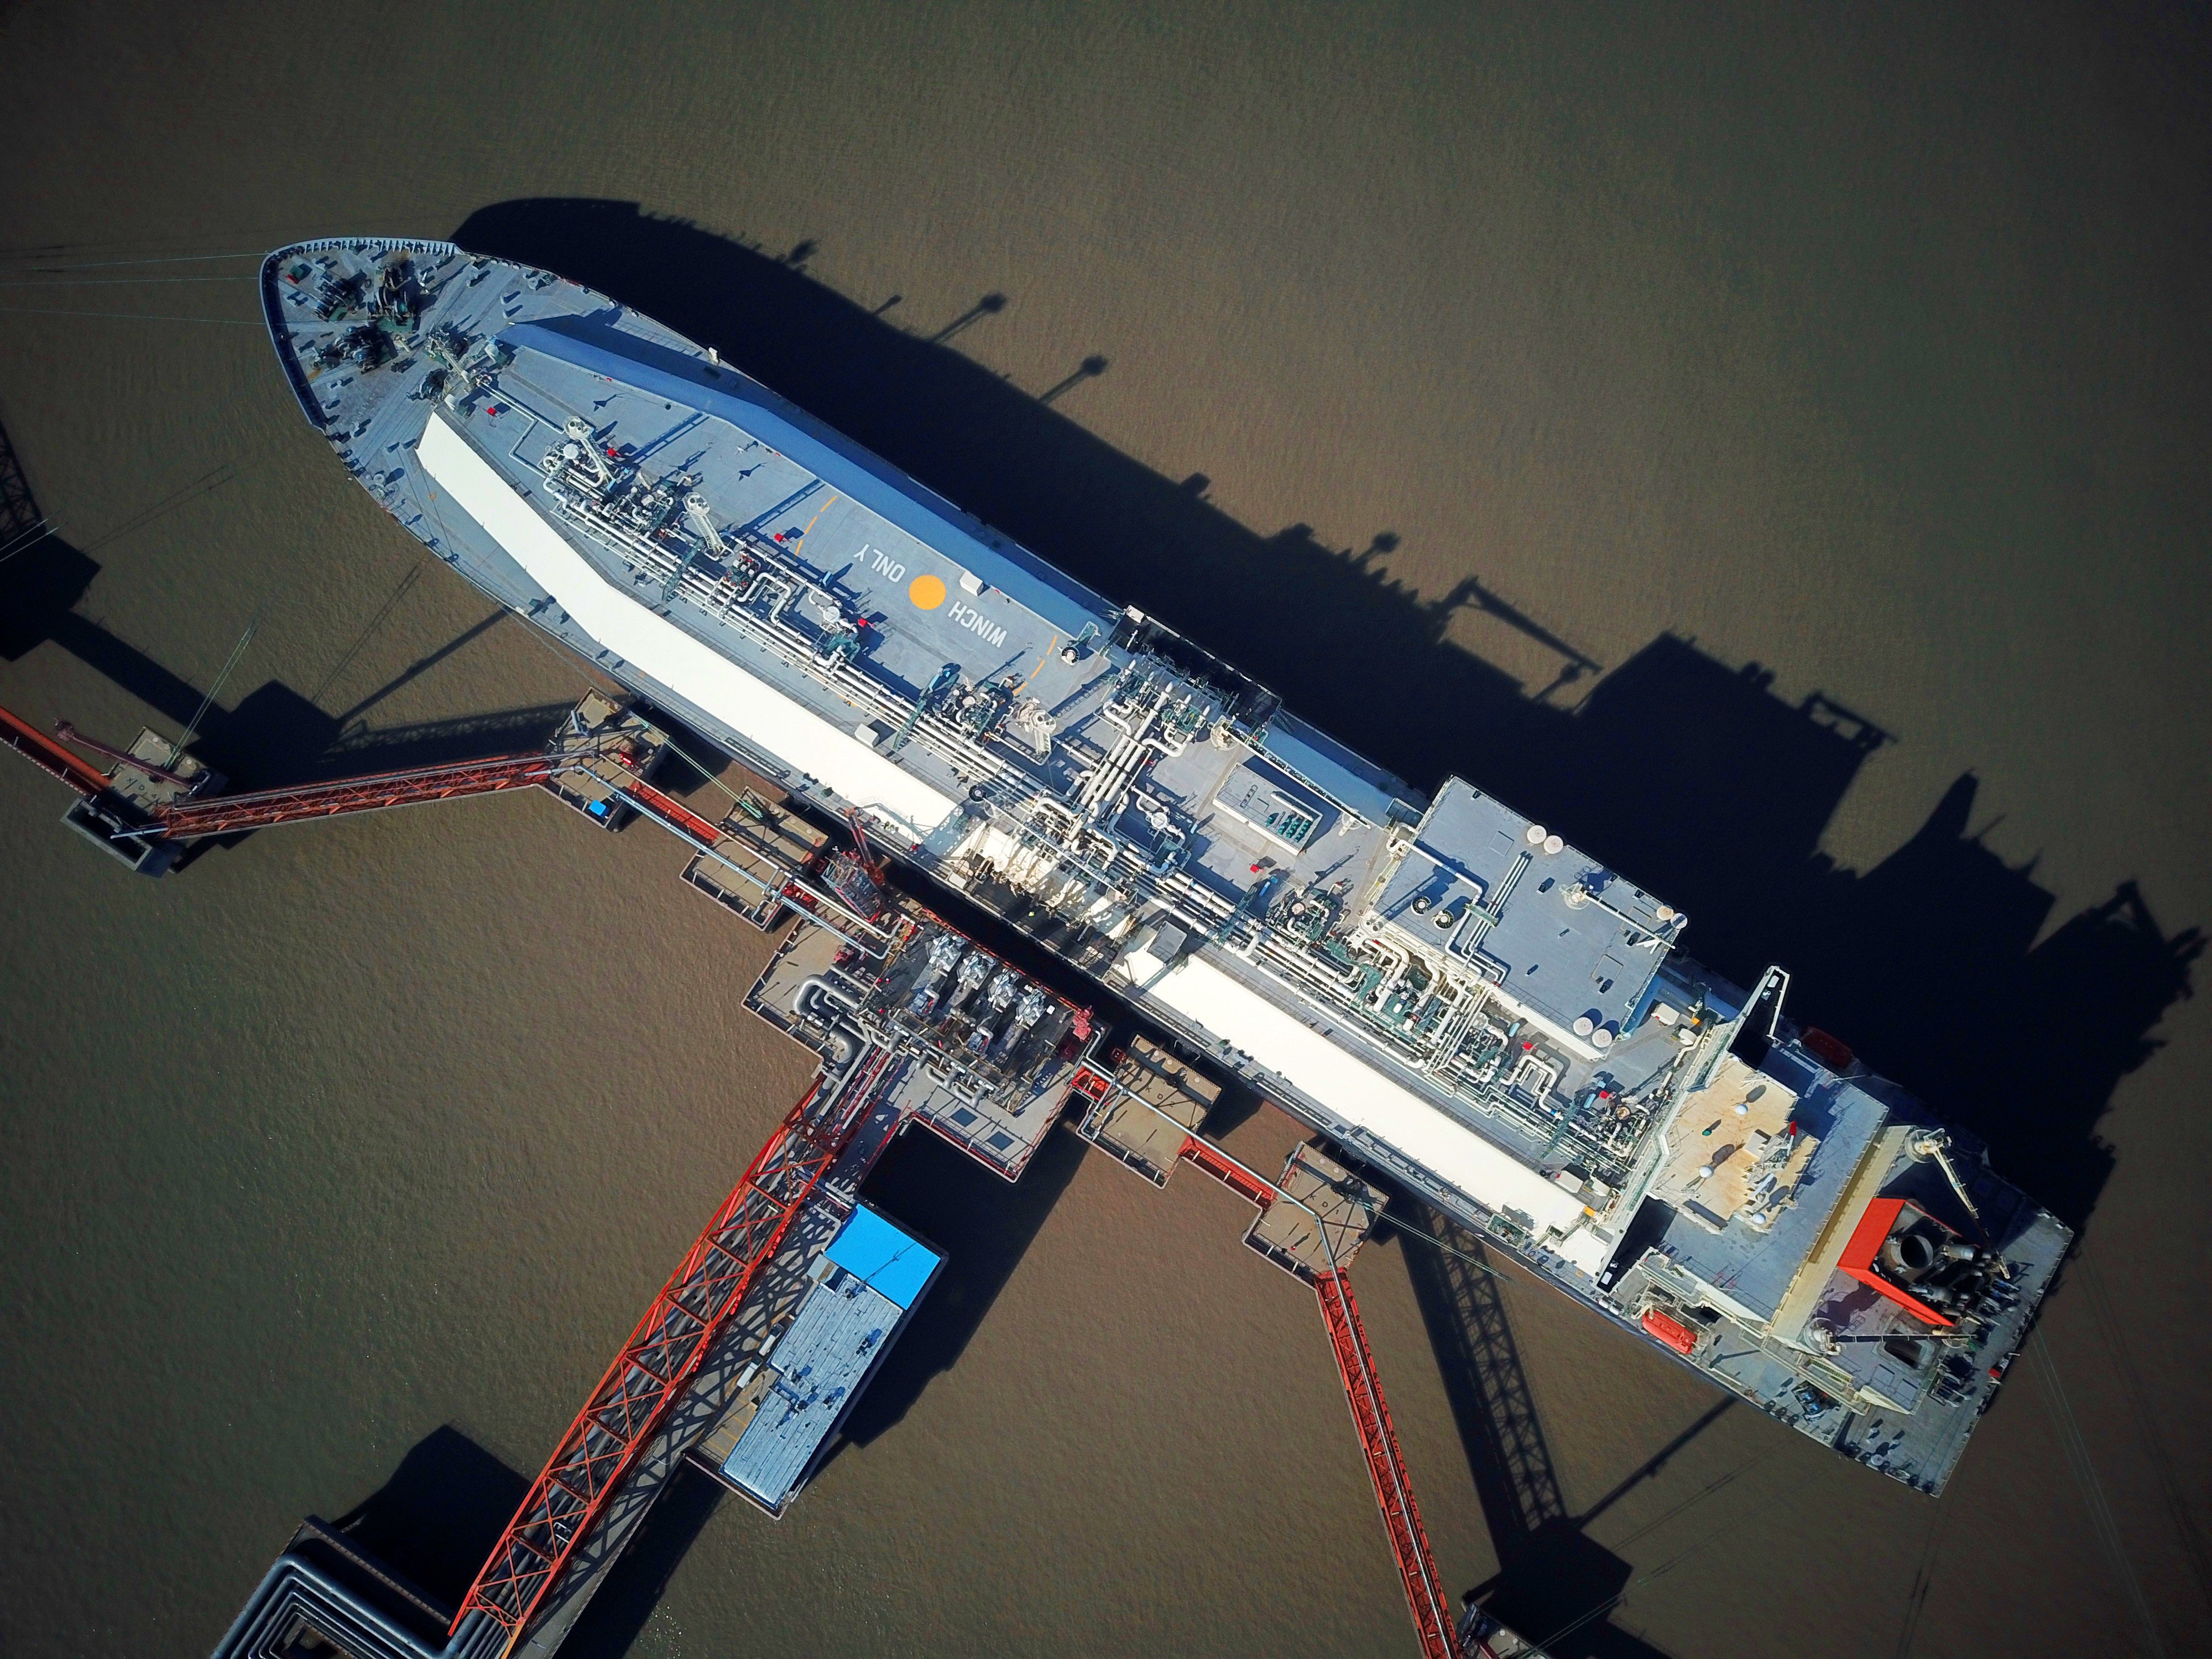 South Korean and Chinese shipbuilders rank among the industry’s top players, particularly for liquefied natural gas (LNG) carriers. Photo: Imaginechina